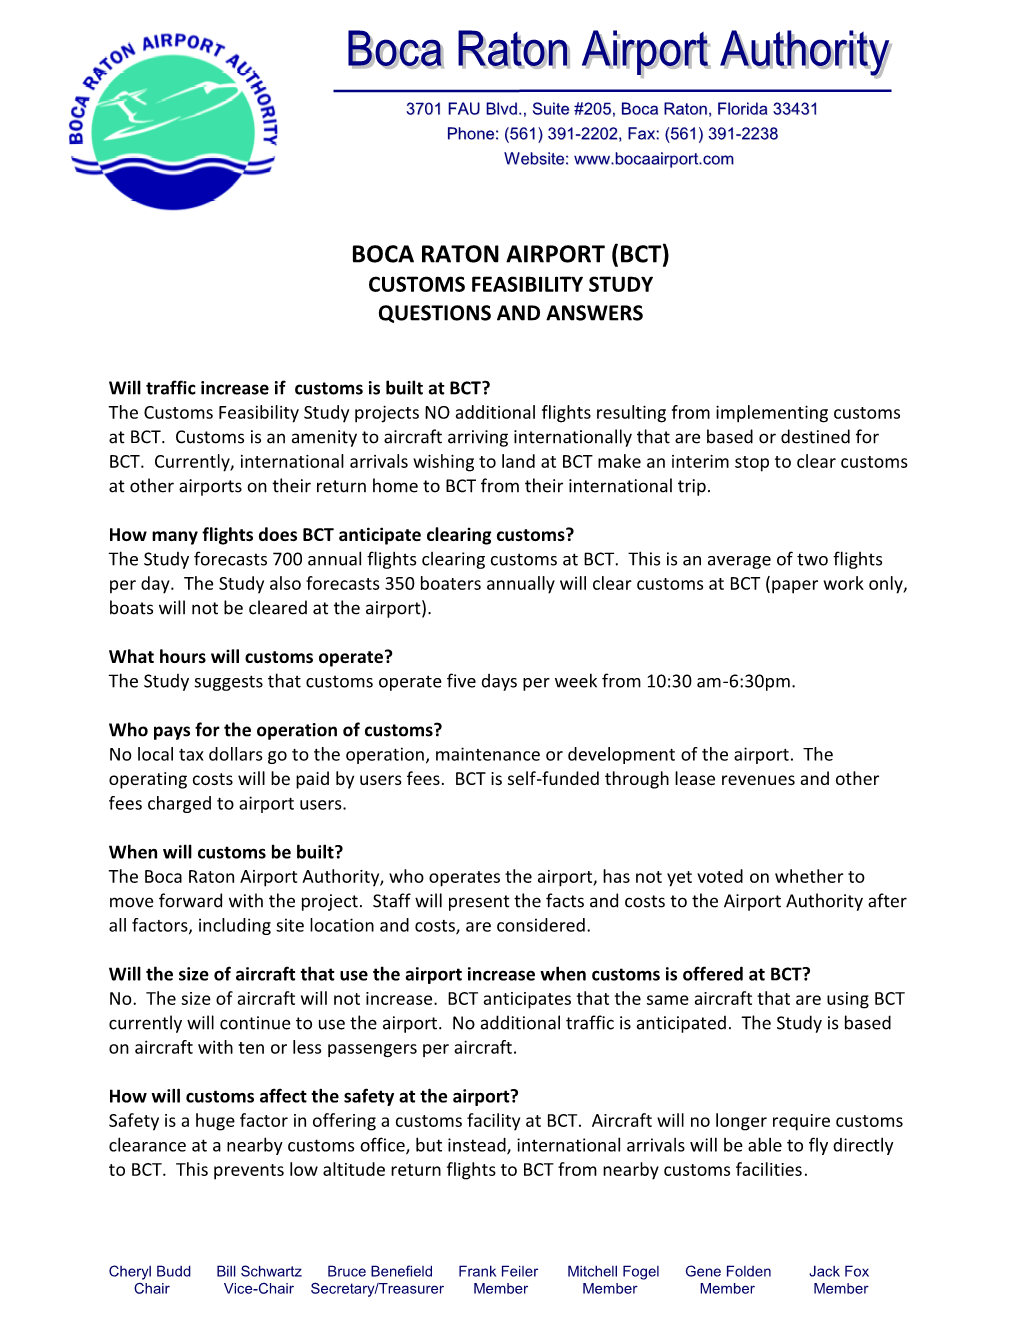 Boca Raton Airport (Bct) Customs Feasibility Study Questions and Answers